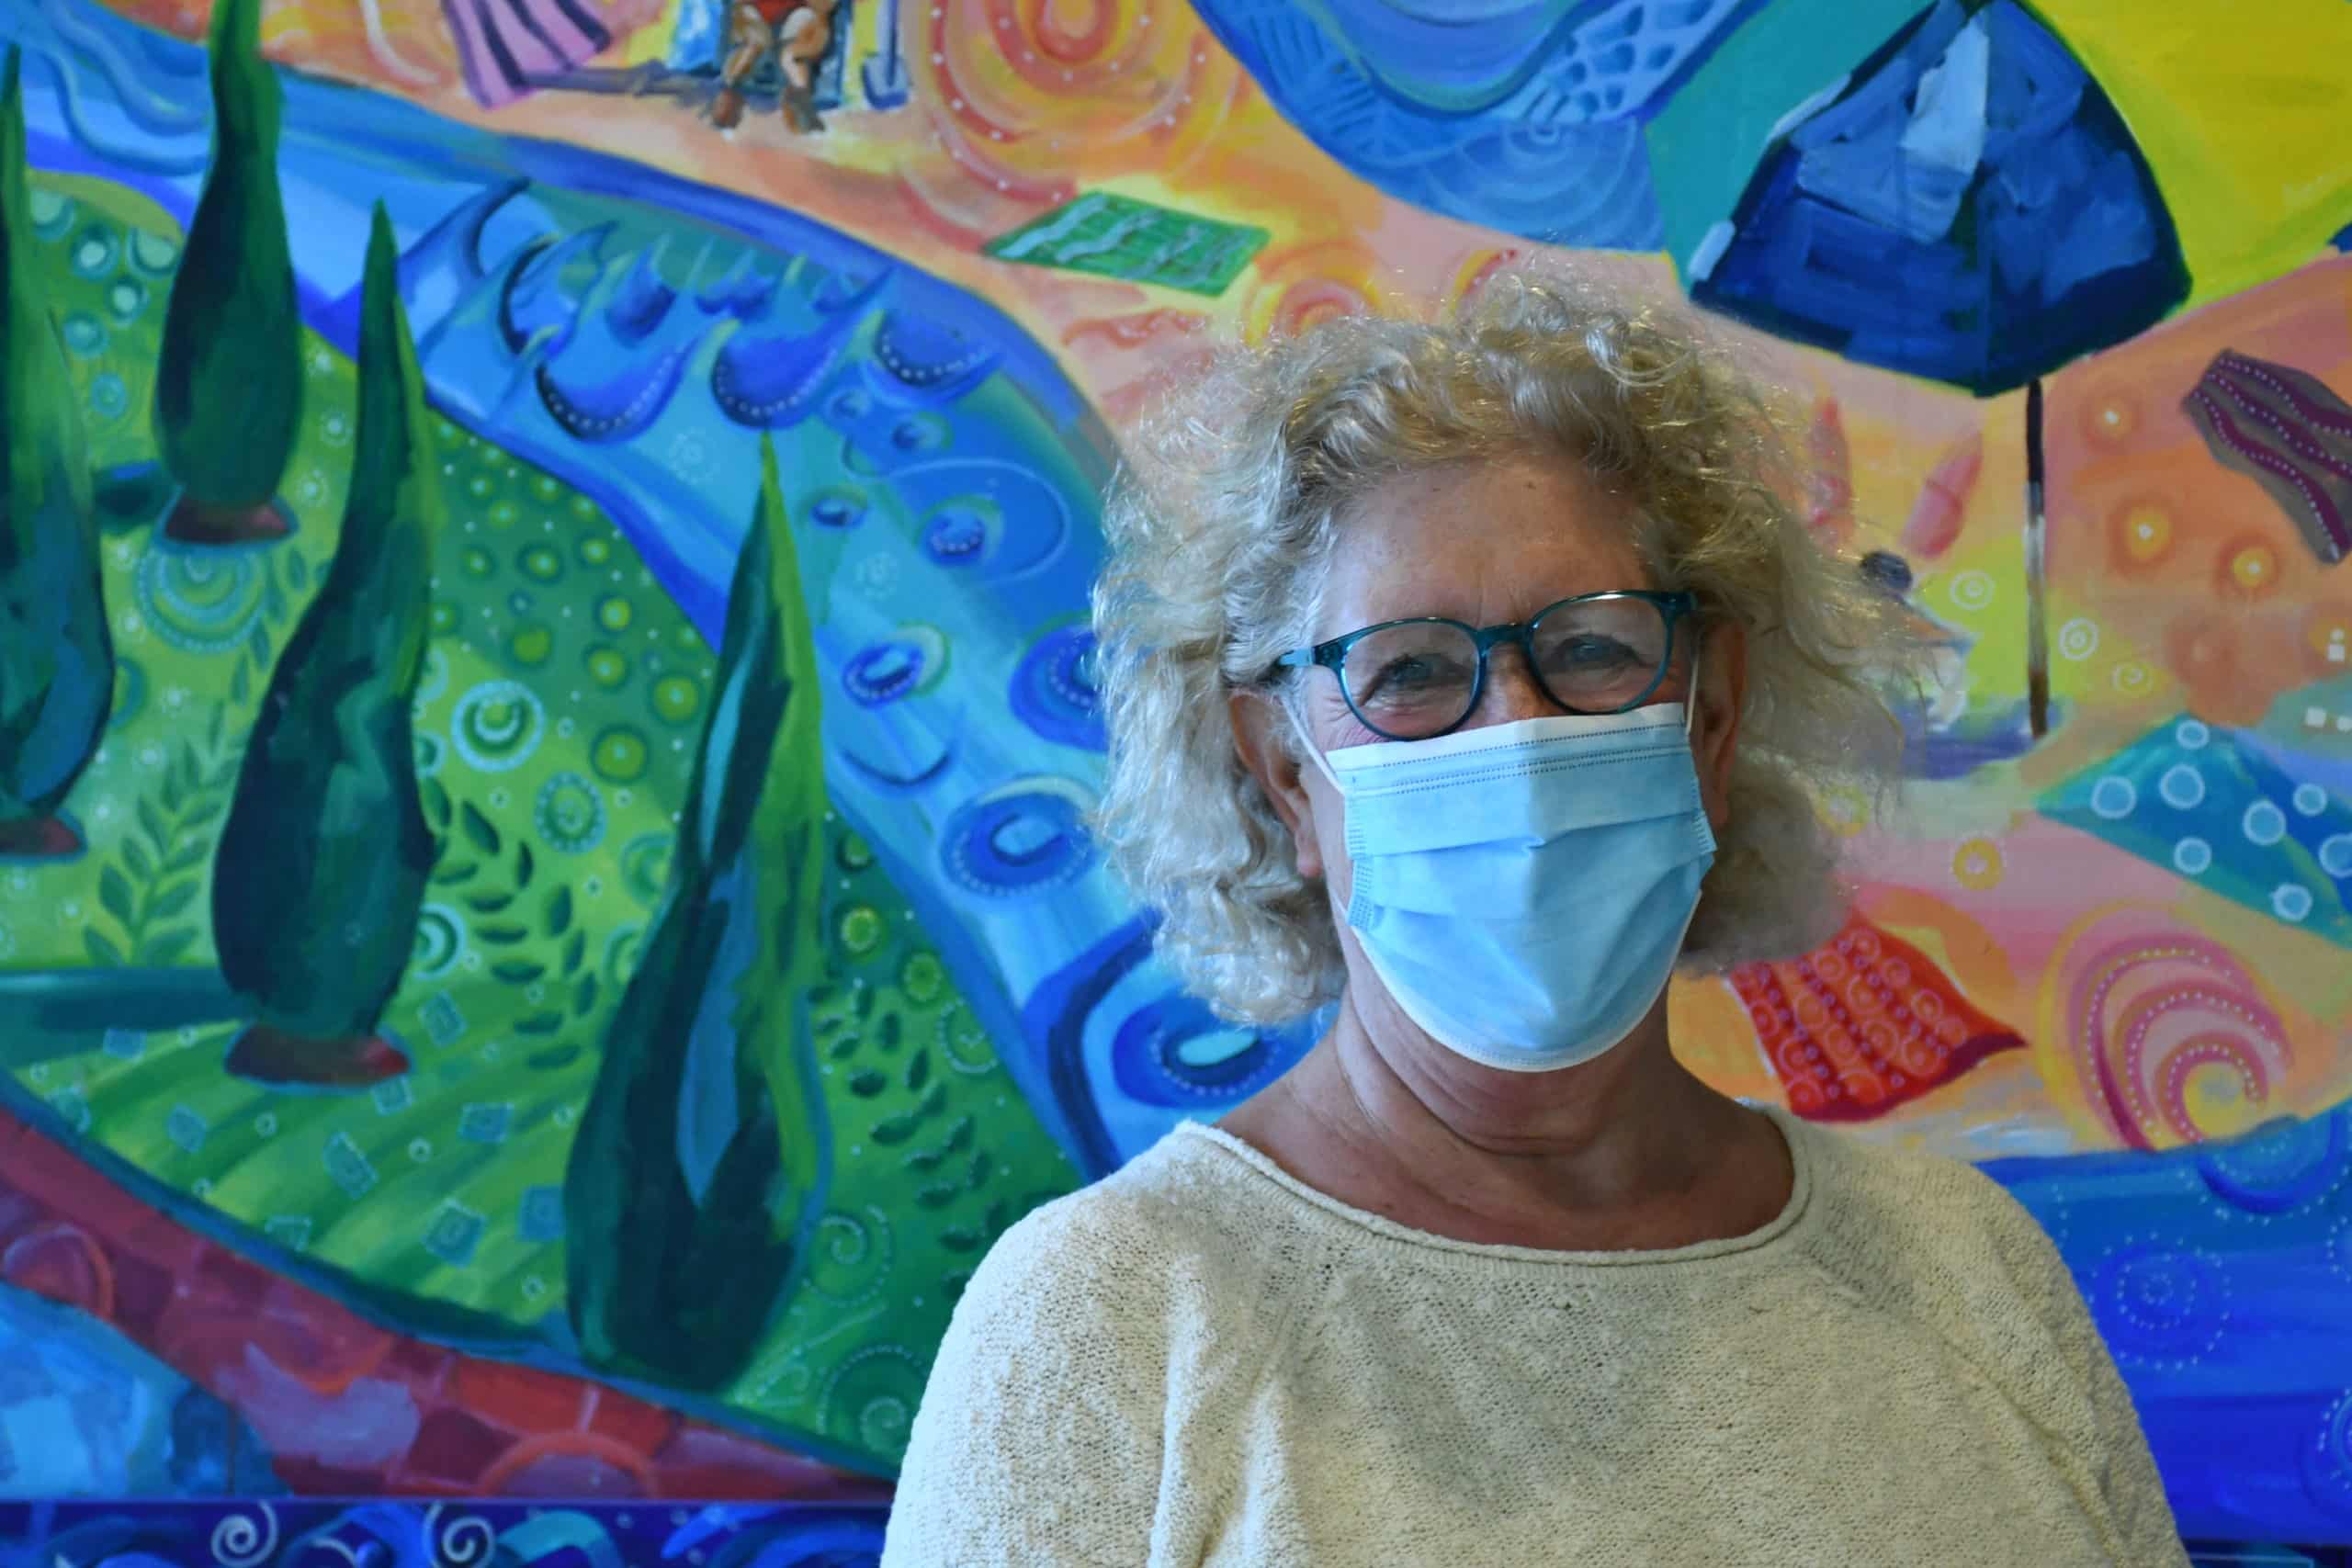 Cathy Kravitz (Jewish white woman with blonde hair in her 60s wearing an ivory sweater and mask) standing in front of a colorful mural